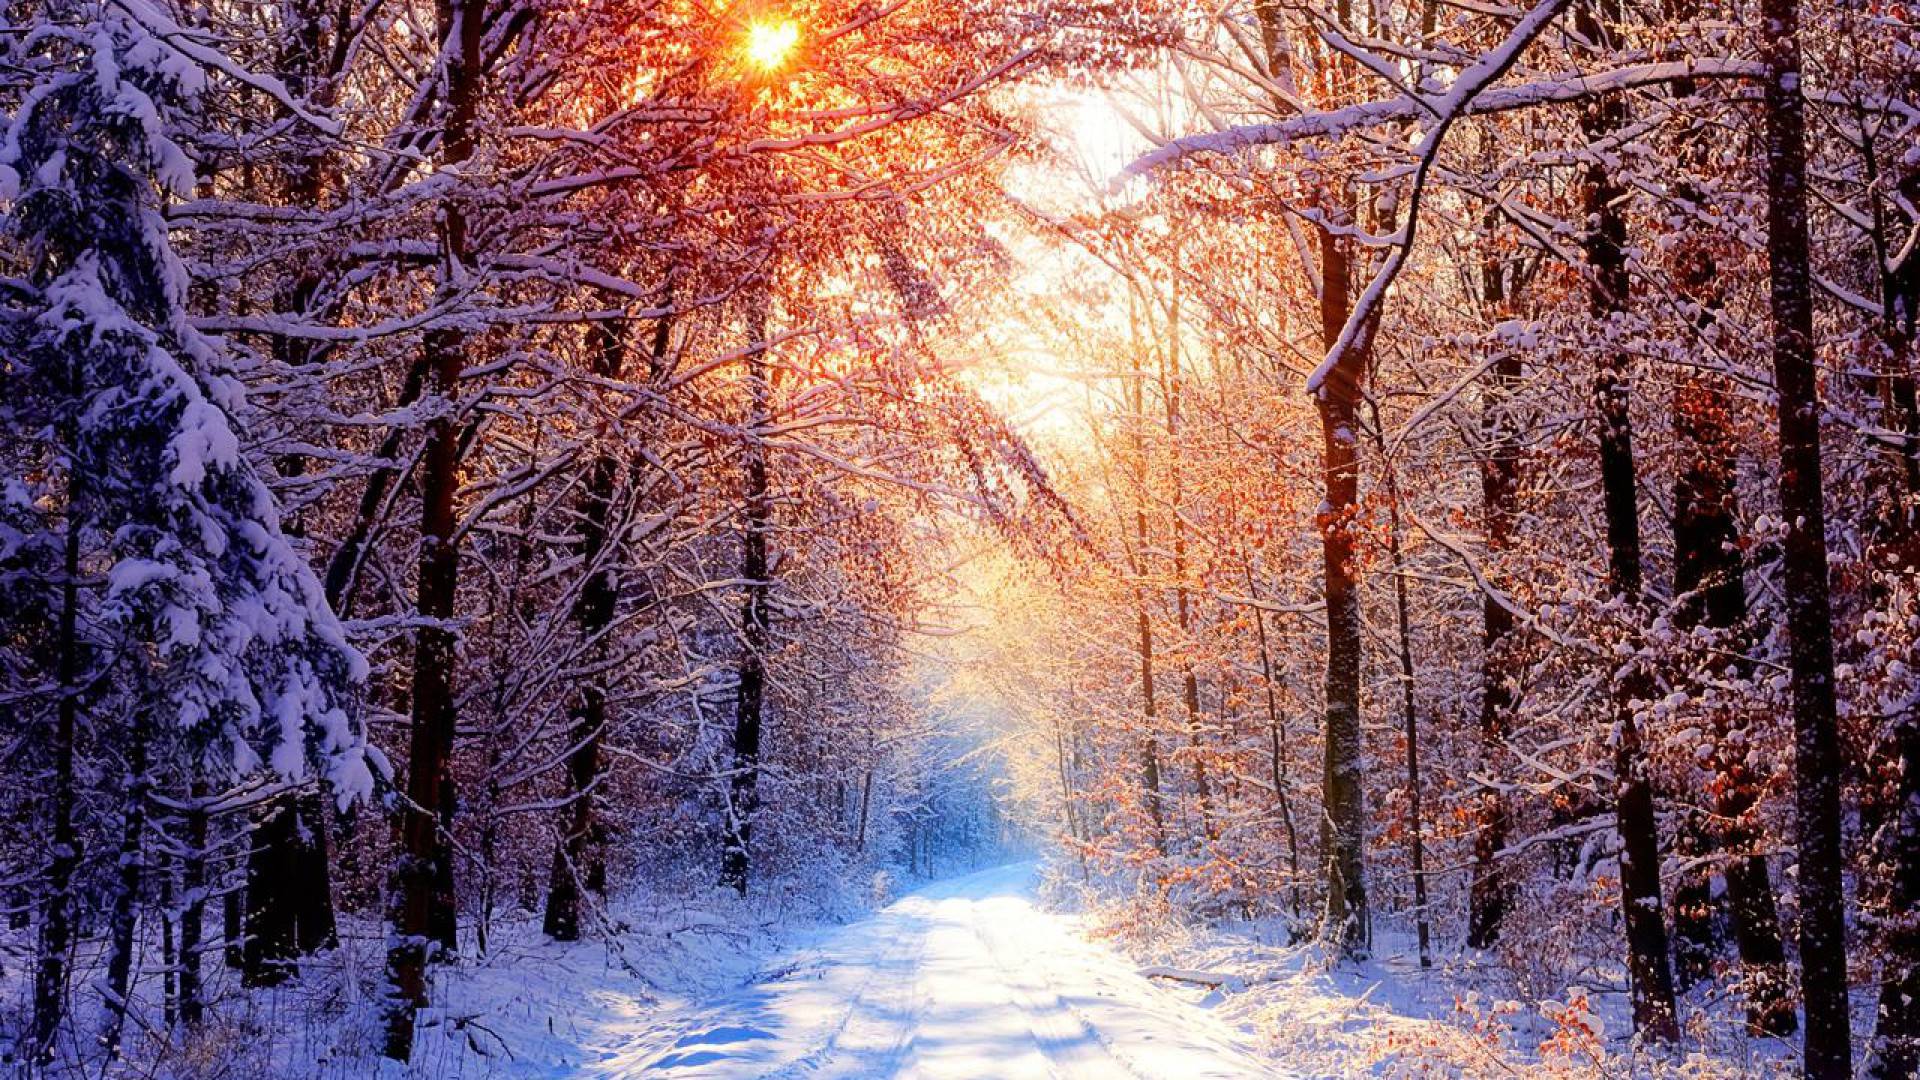 Like or share Creek Winter Forest Wallpaper X Winter Snowy Forest